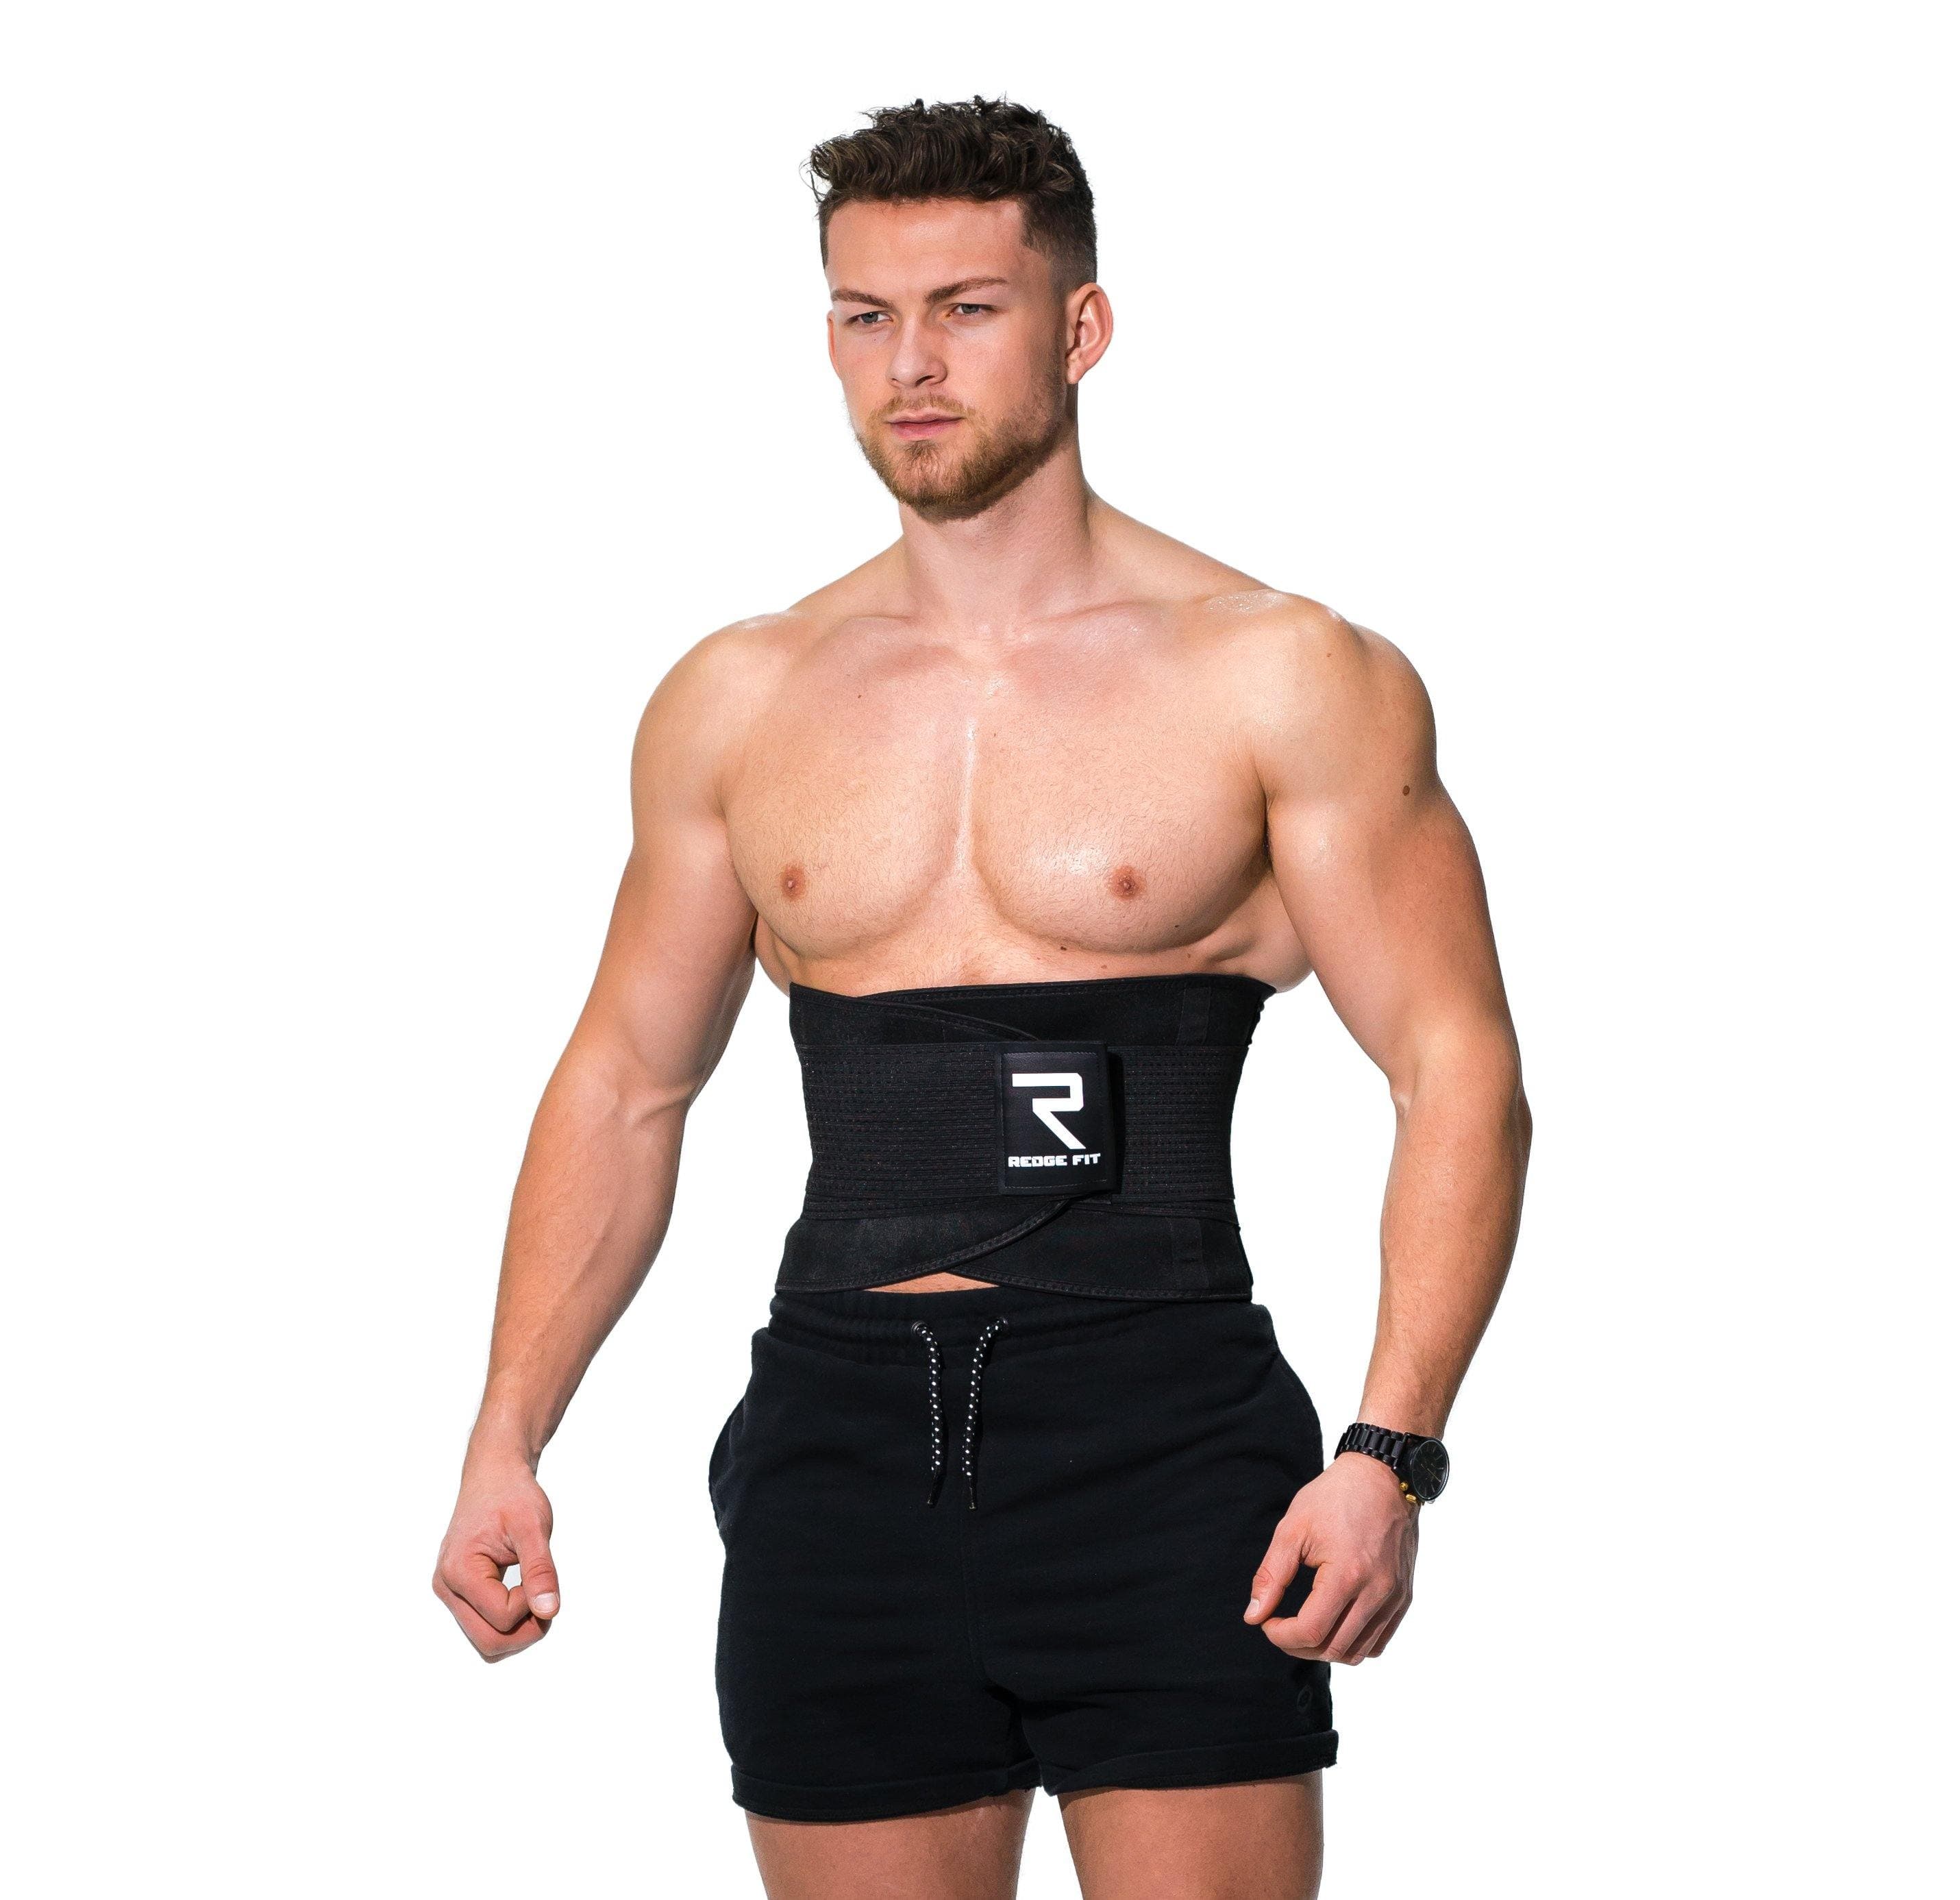 Man modeling the Redge Fit Full Body All In One Pack Sweat Belt  Available at https://www.getredge.com/products/copy-of-core-focus-all-in-one-pack